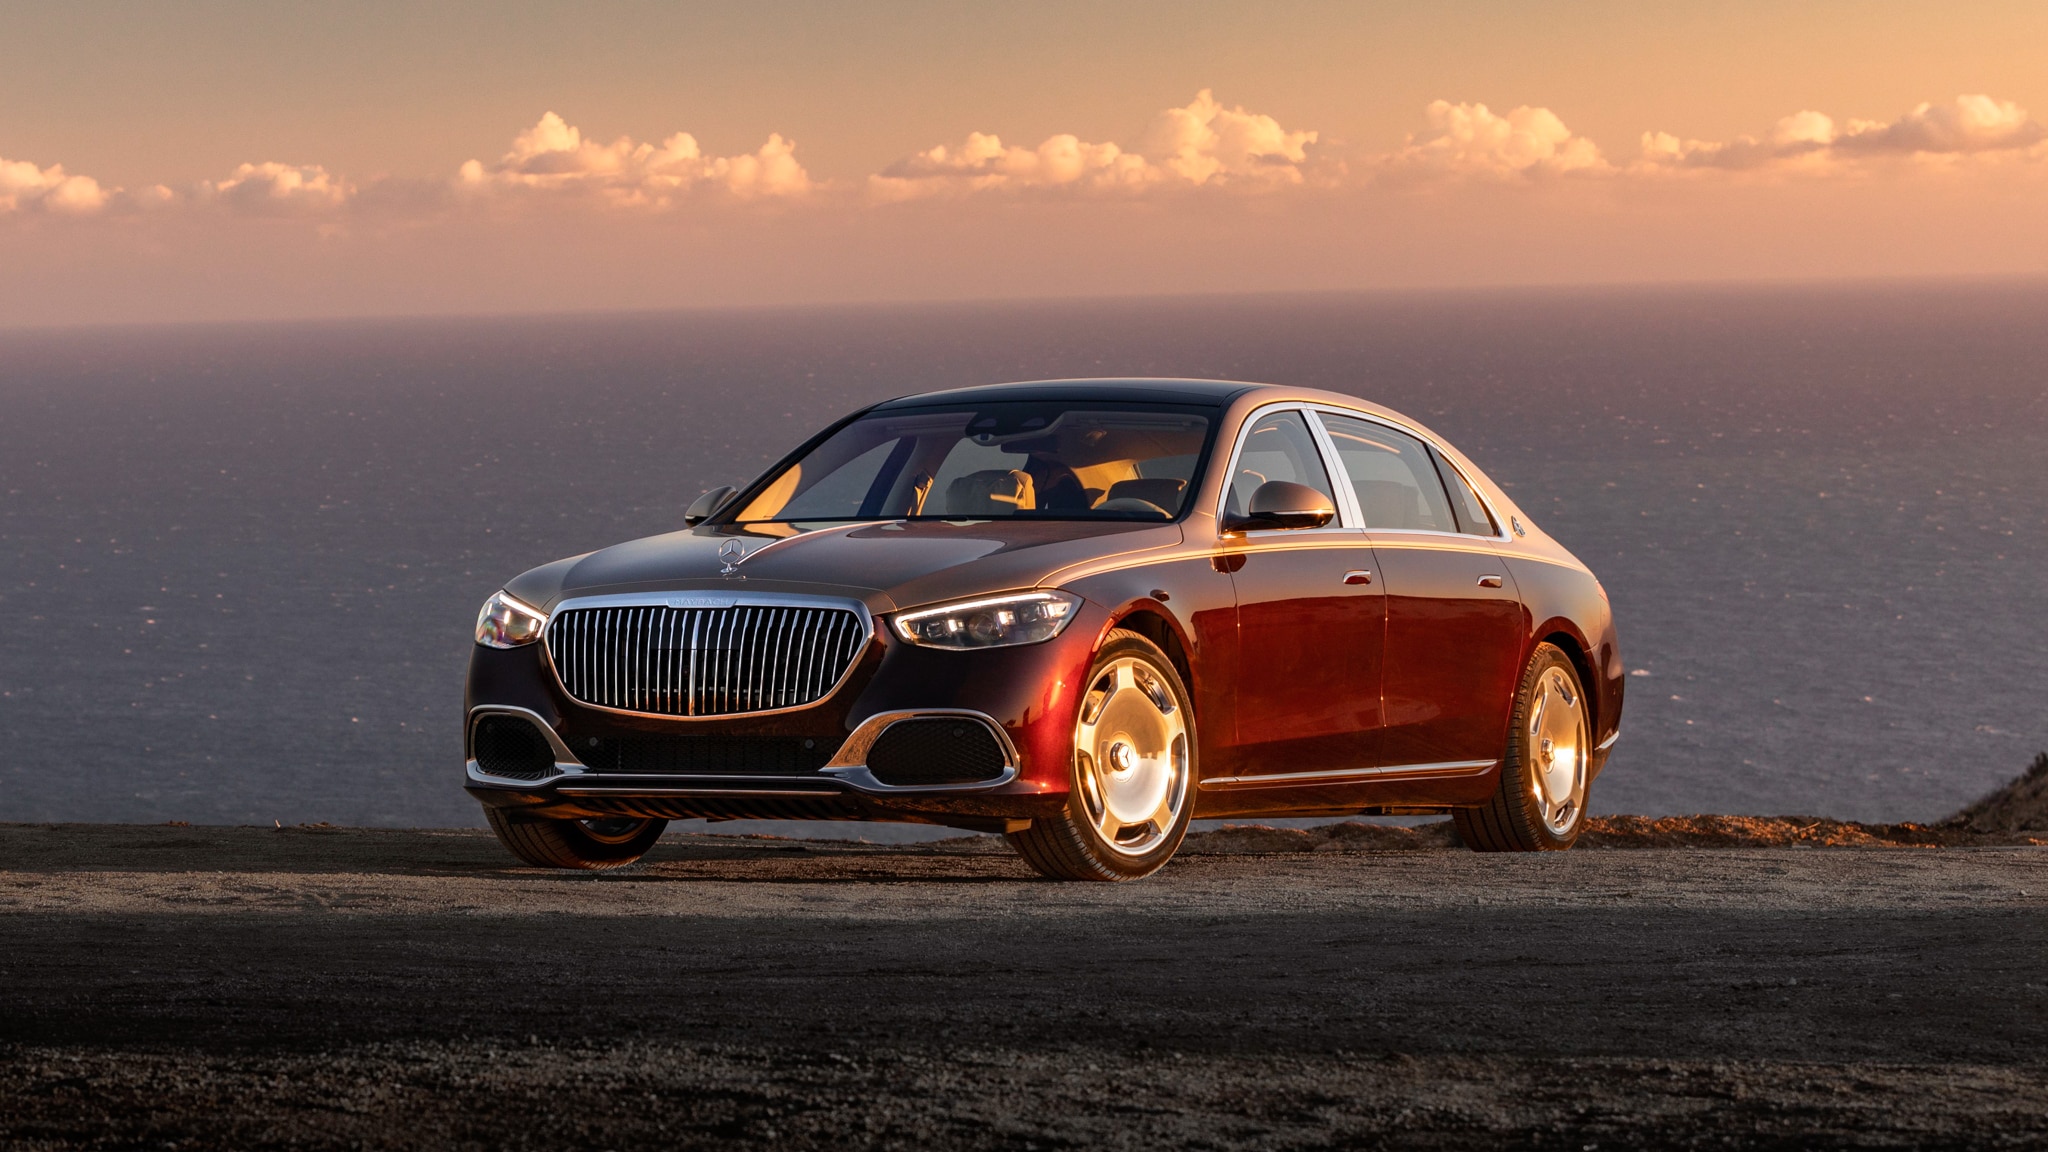 Mercedes Maybach S Class Details: A New Level Of Luxury?